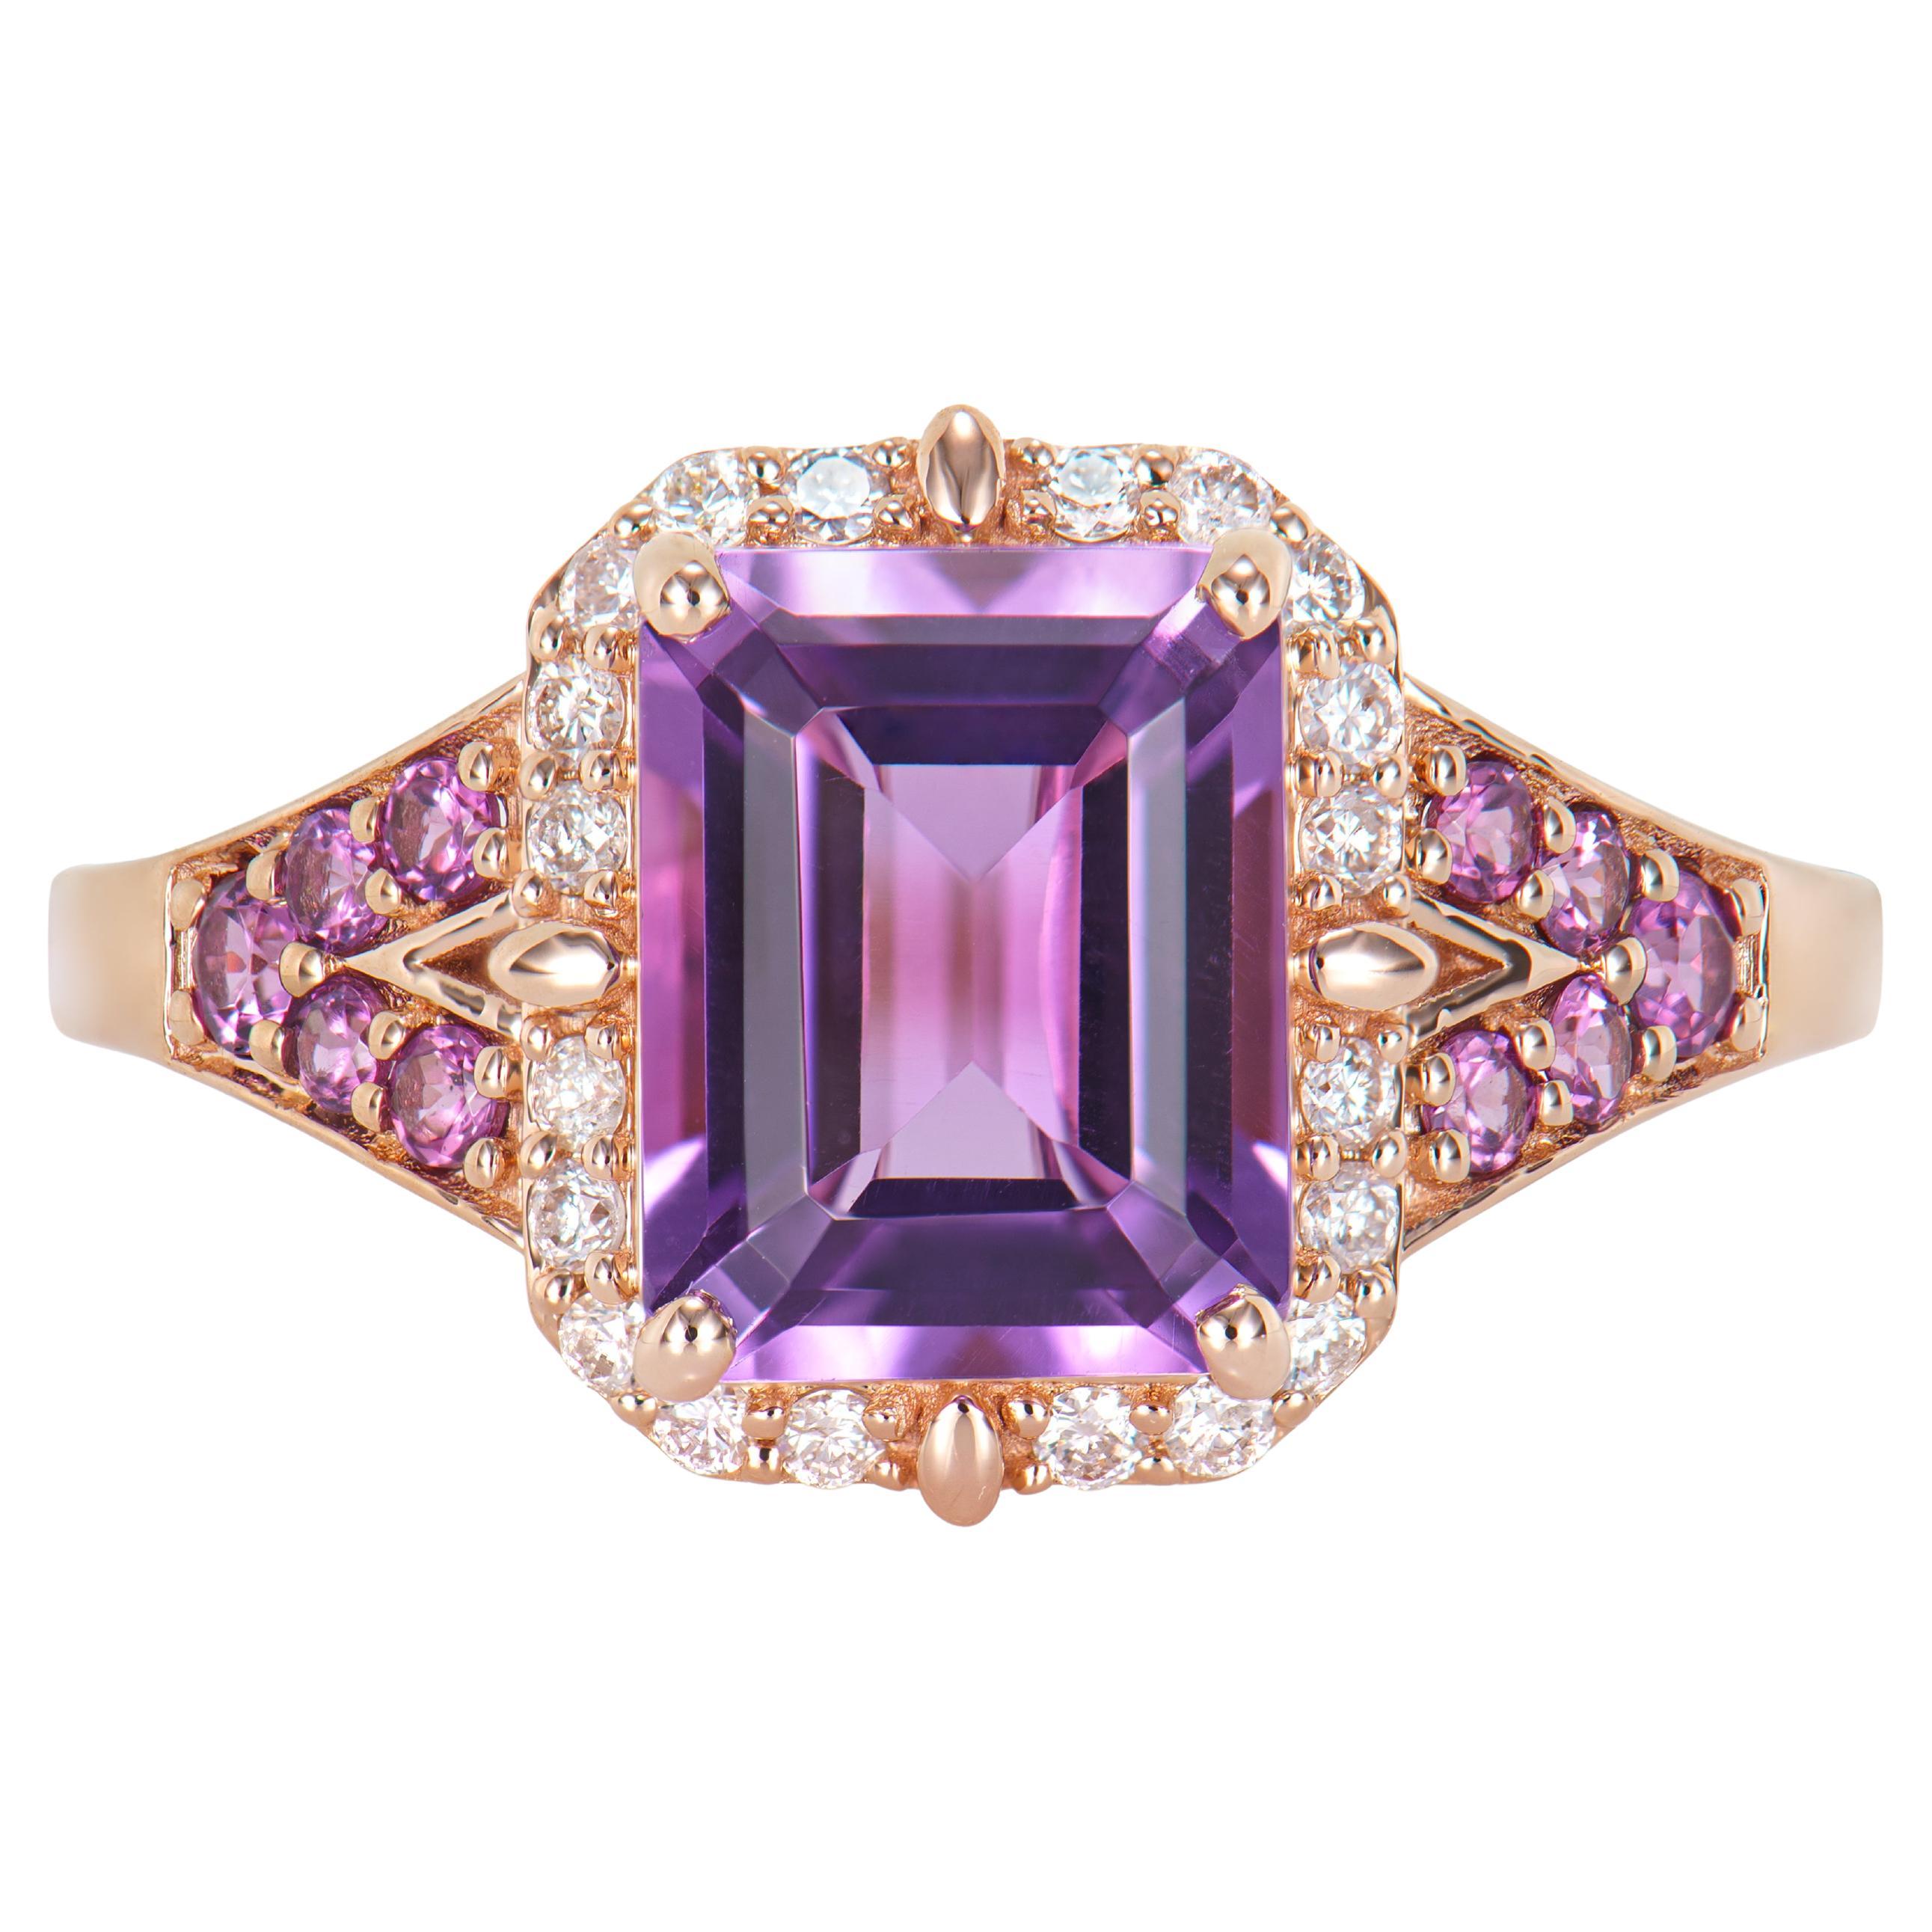 2.21 Carat Amethyst Fancy Ring in 14KRG with Rhodolite and White Diamond.  